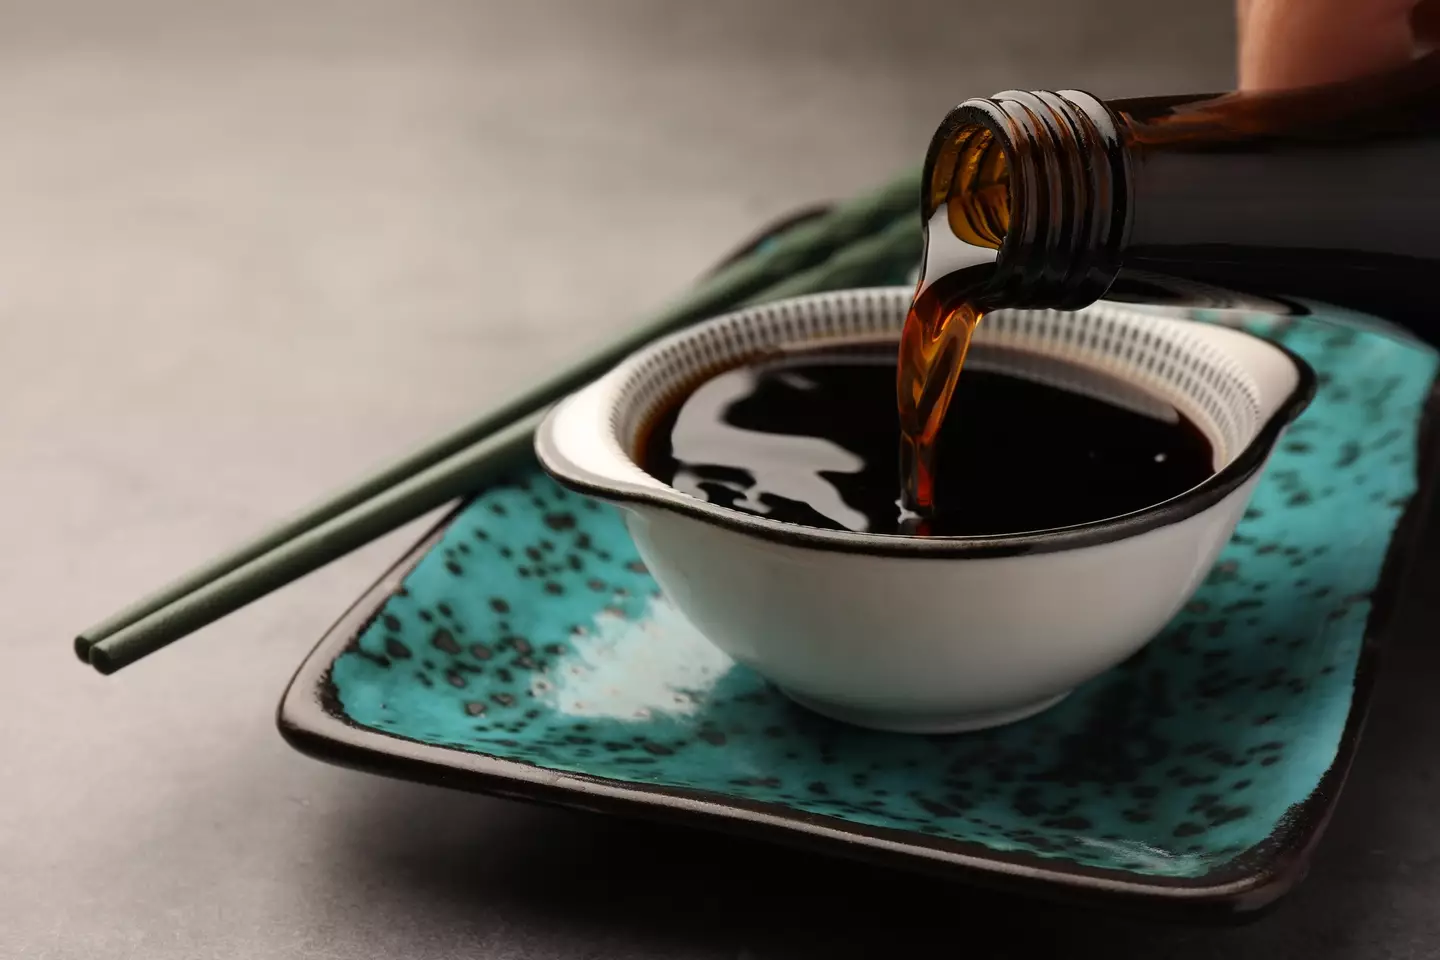 I wouldn't consume buckets of soy sauce, of course (Getty stock image)